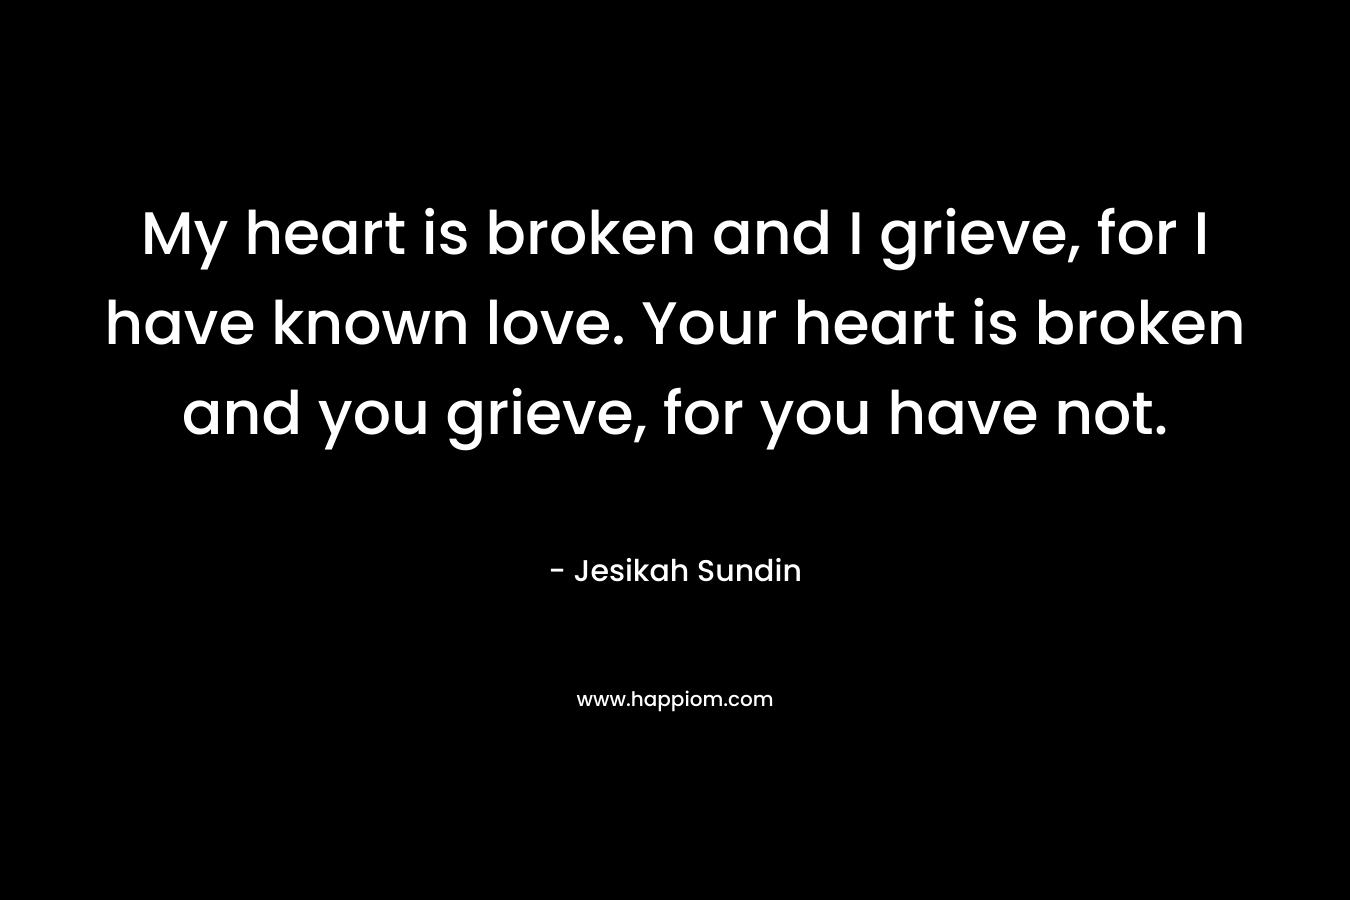 My heart is broken and I grieve, for I have known love. Your heart is broken and you grieve, for you have not. – Jesikah Sundin